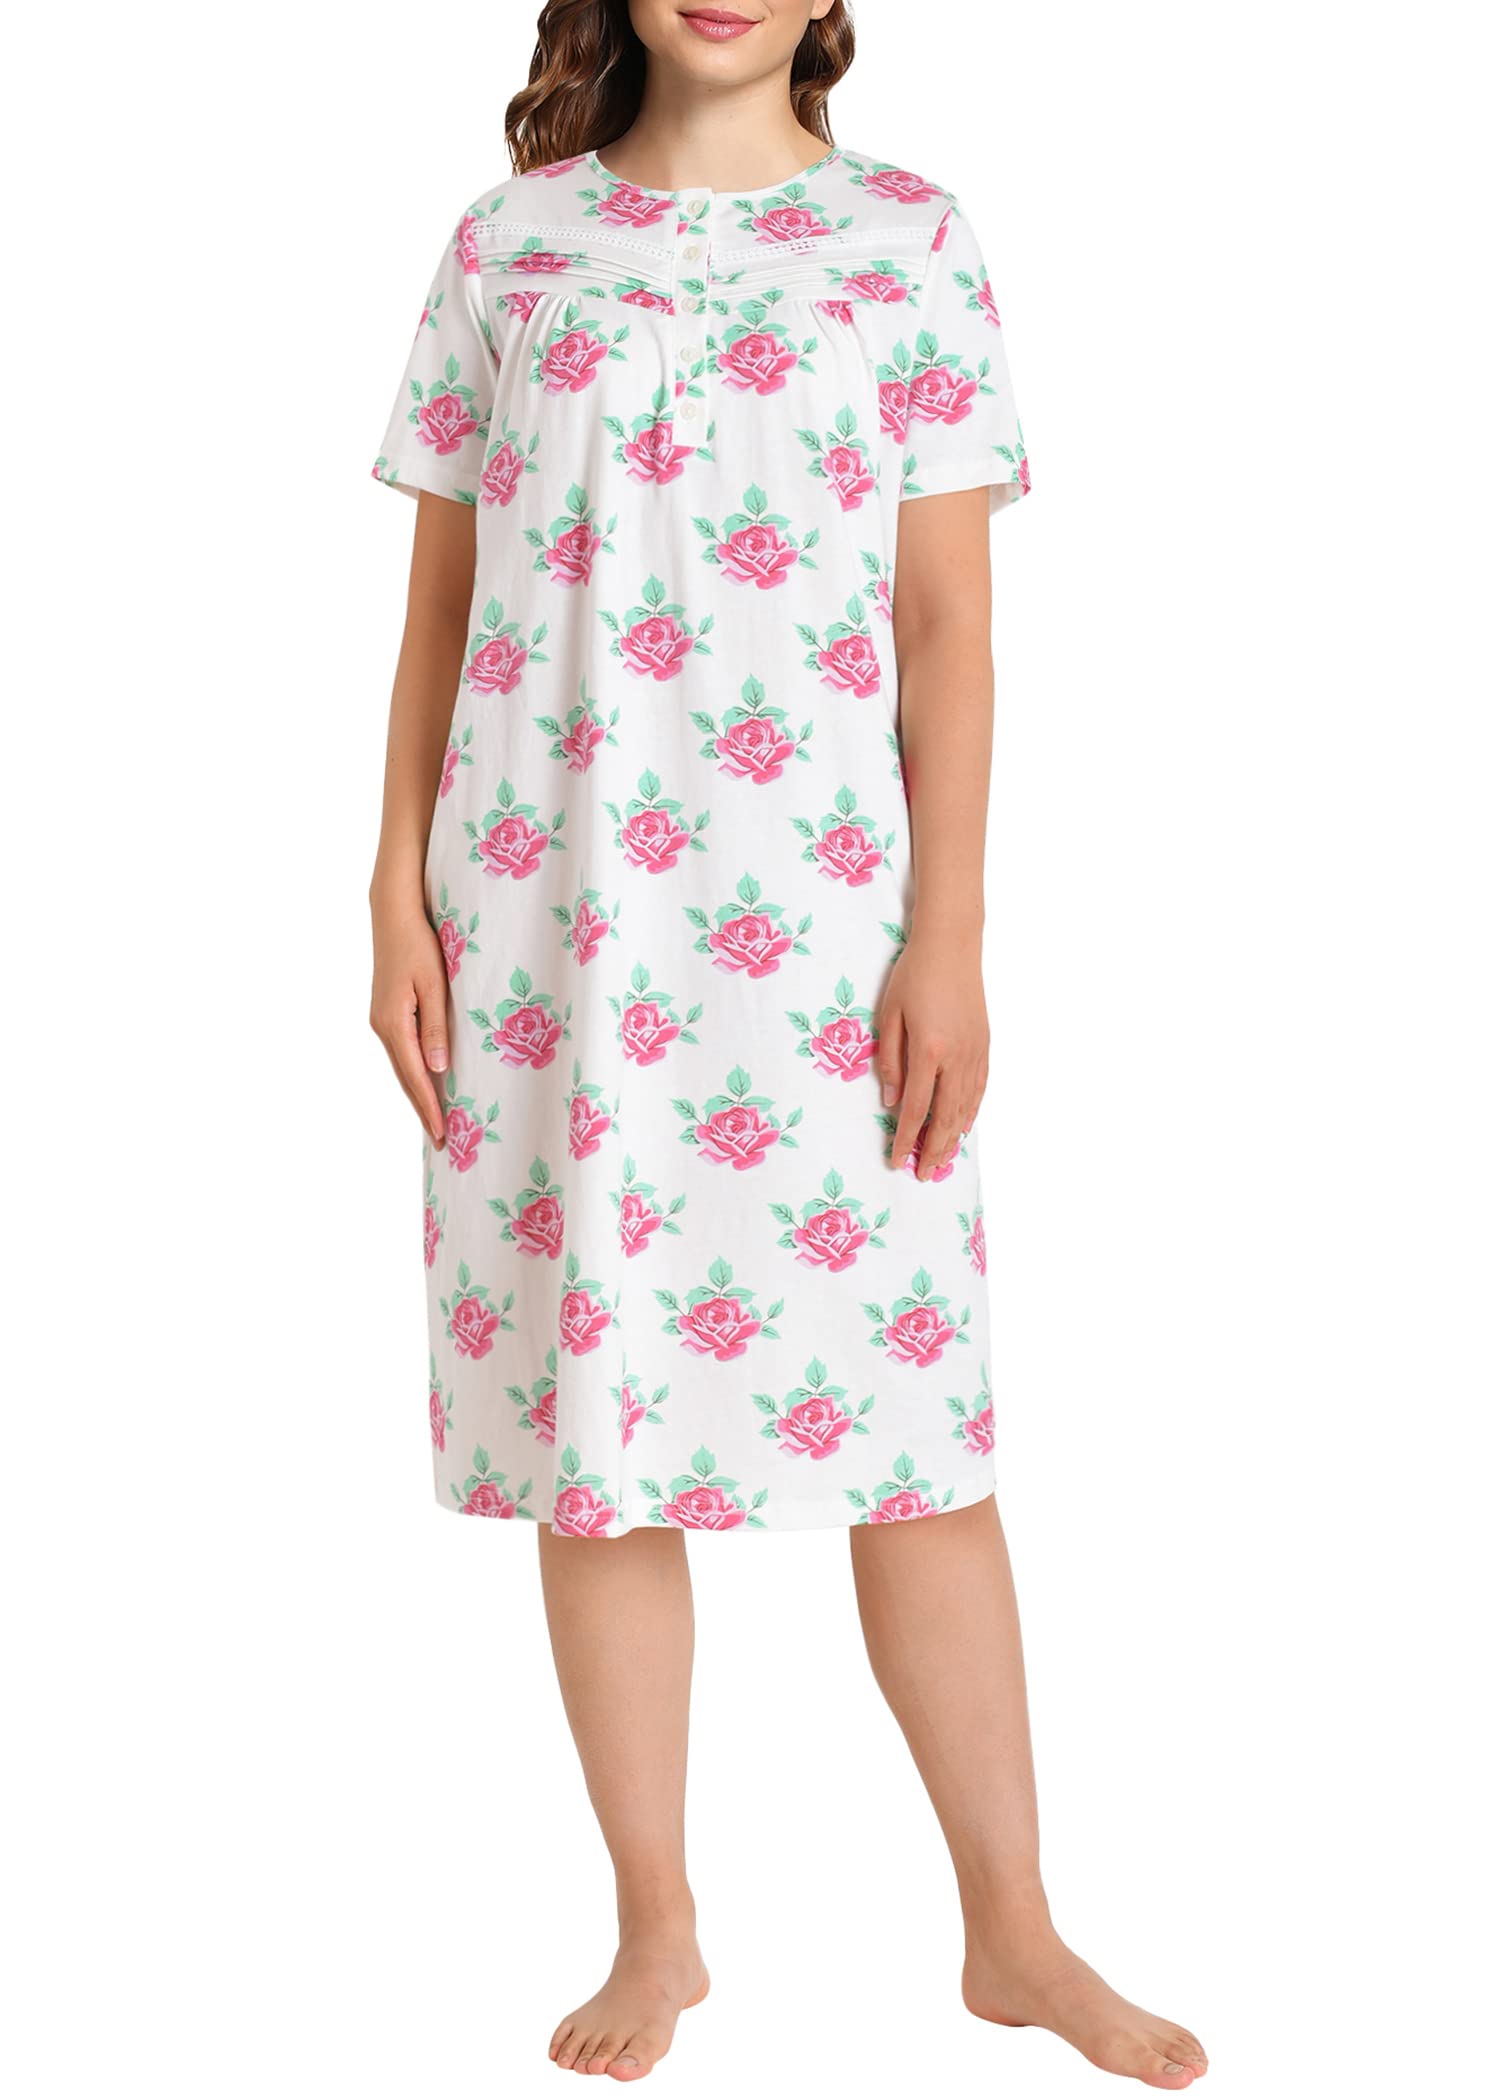 Women's Old Fashioned Soft Cotton Floral Nightgown - Latuza